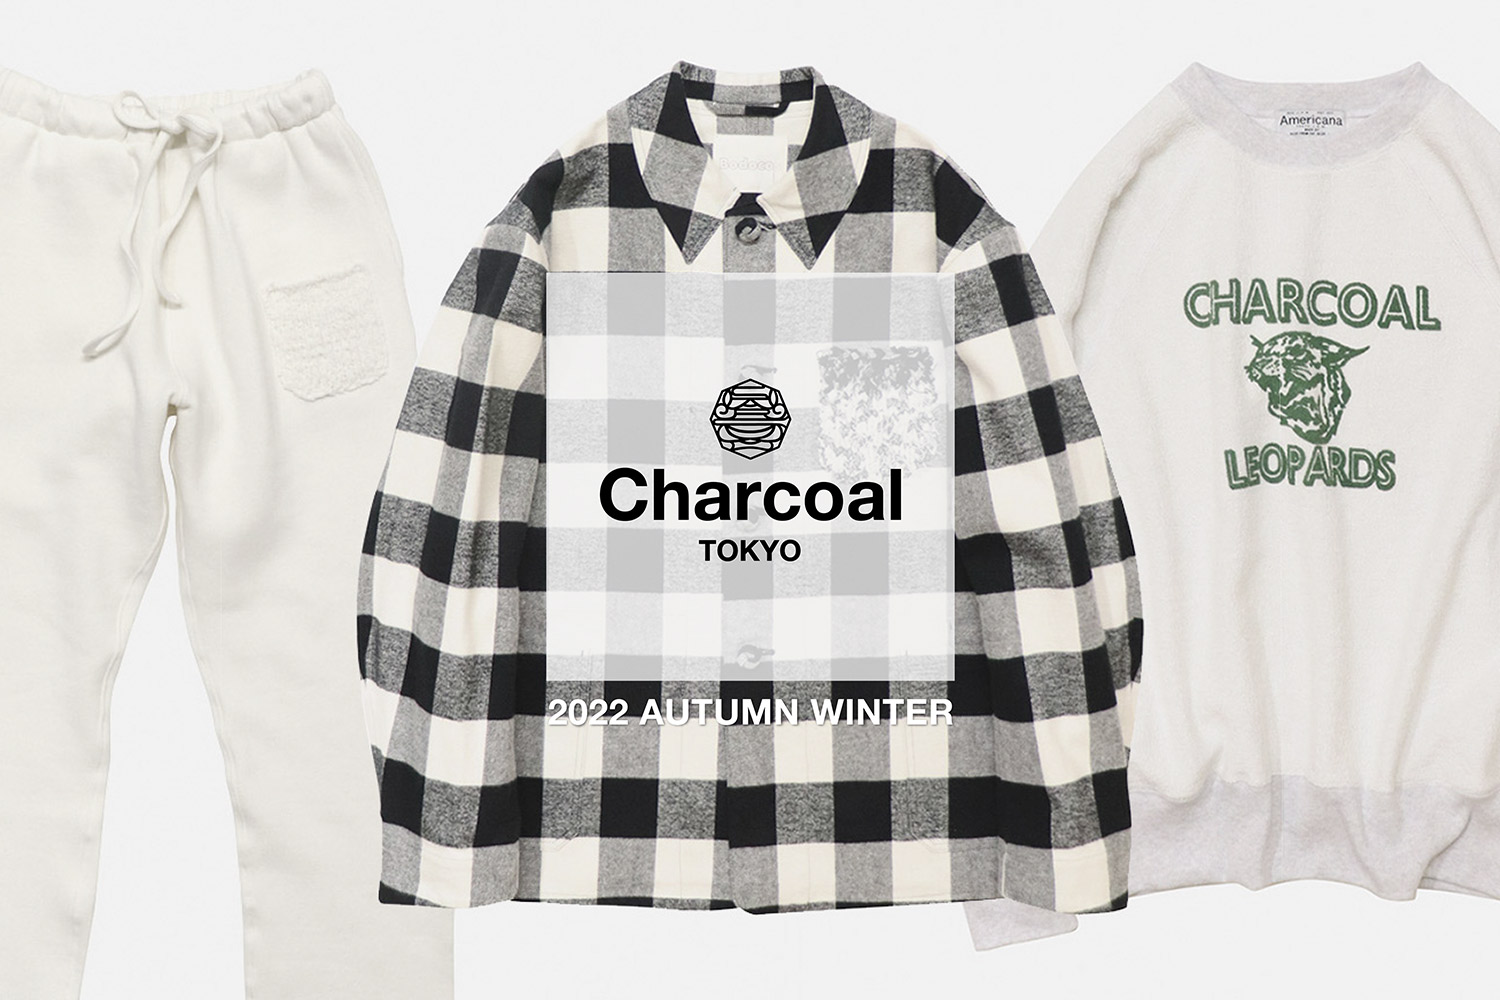 〈Charcoal TOKYO〉22AW 先行予約会開催のお知らせ